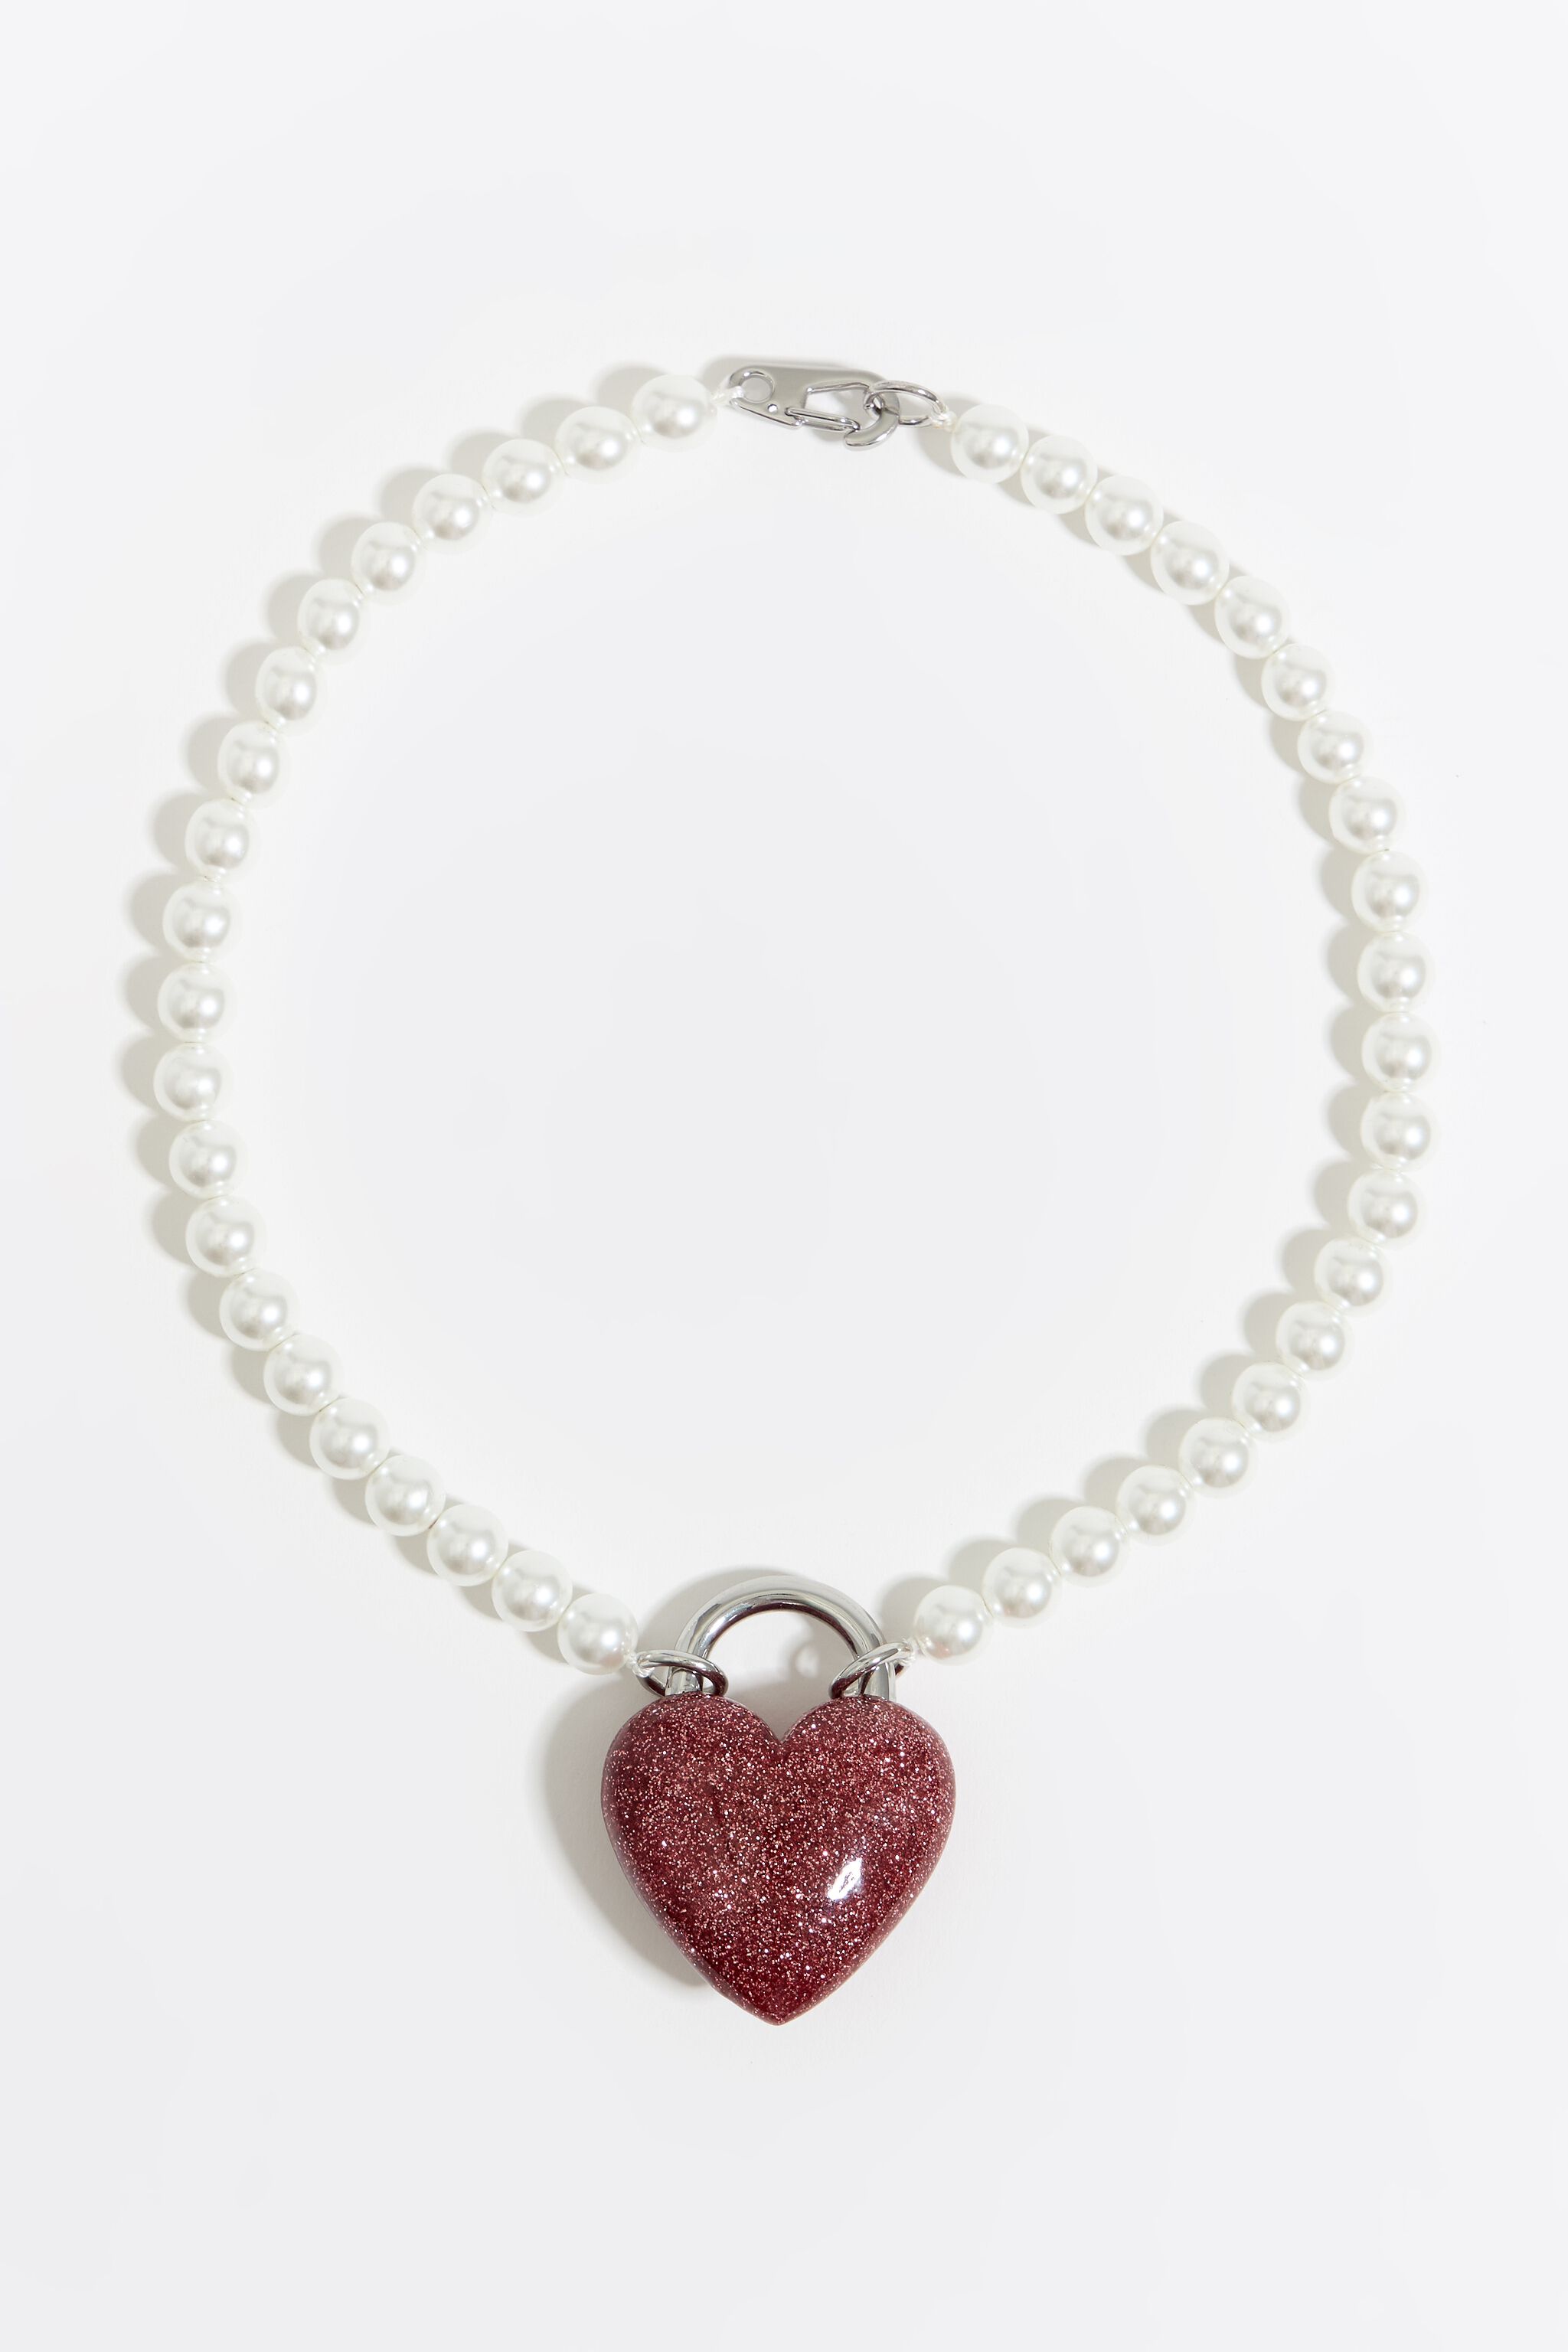 Golden,White Party Wear Simple Pearl Hollow Heart Alloy Three-Layer Necklace  Wholesale at Rs 126.75/piece in New Delhi